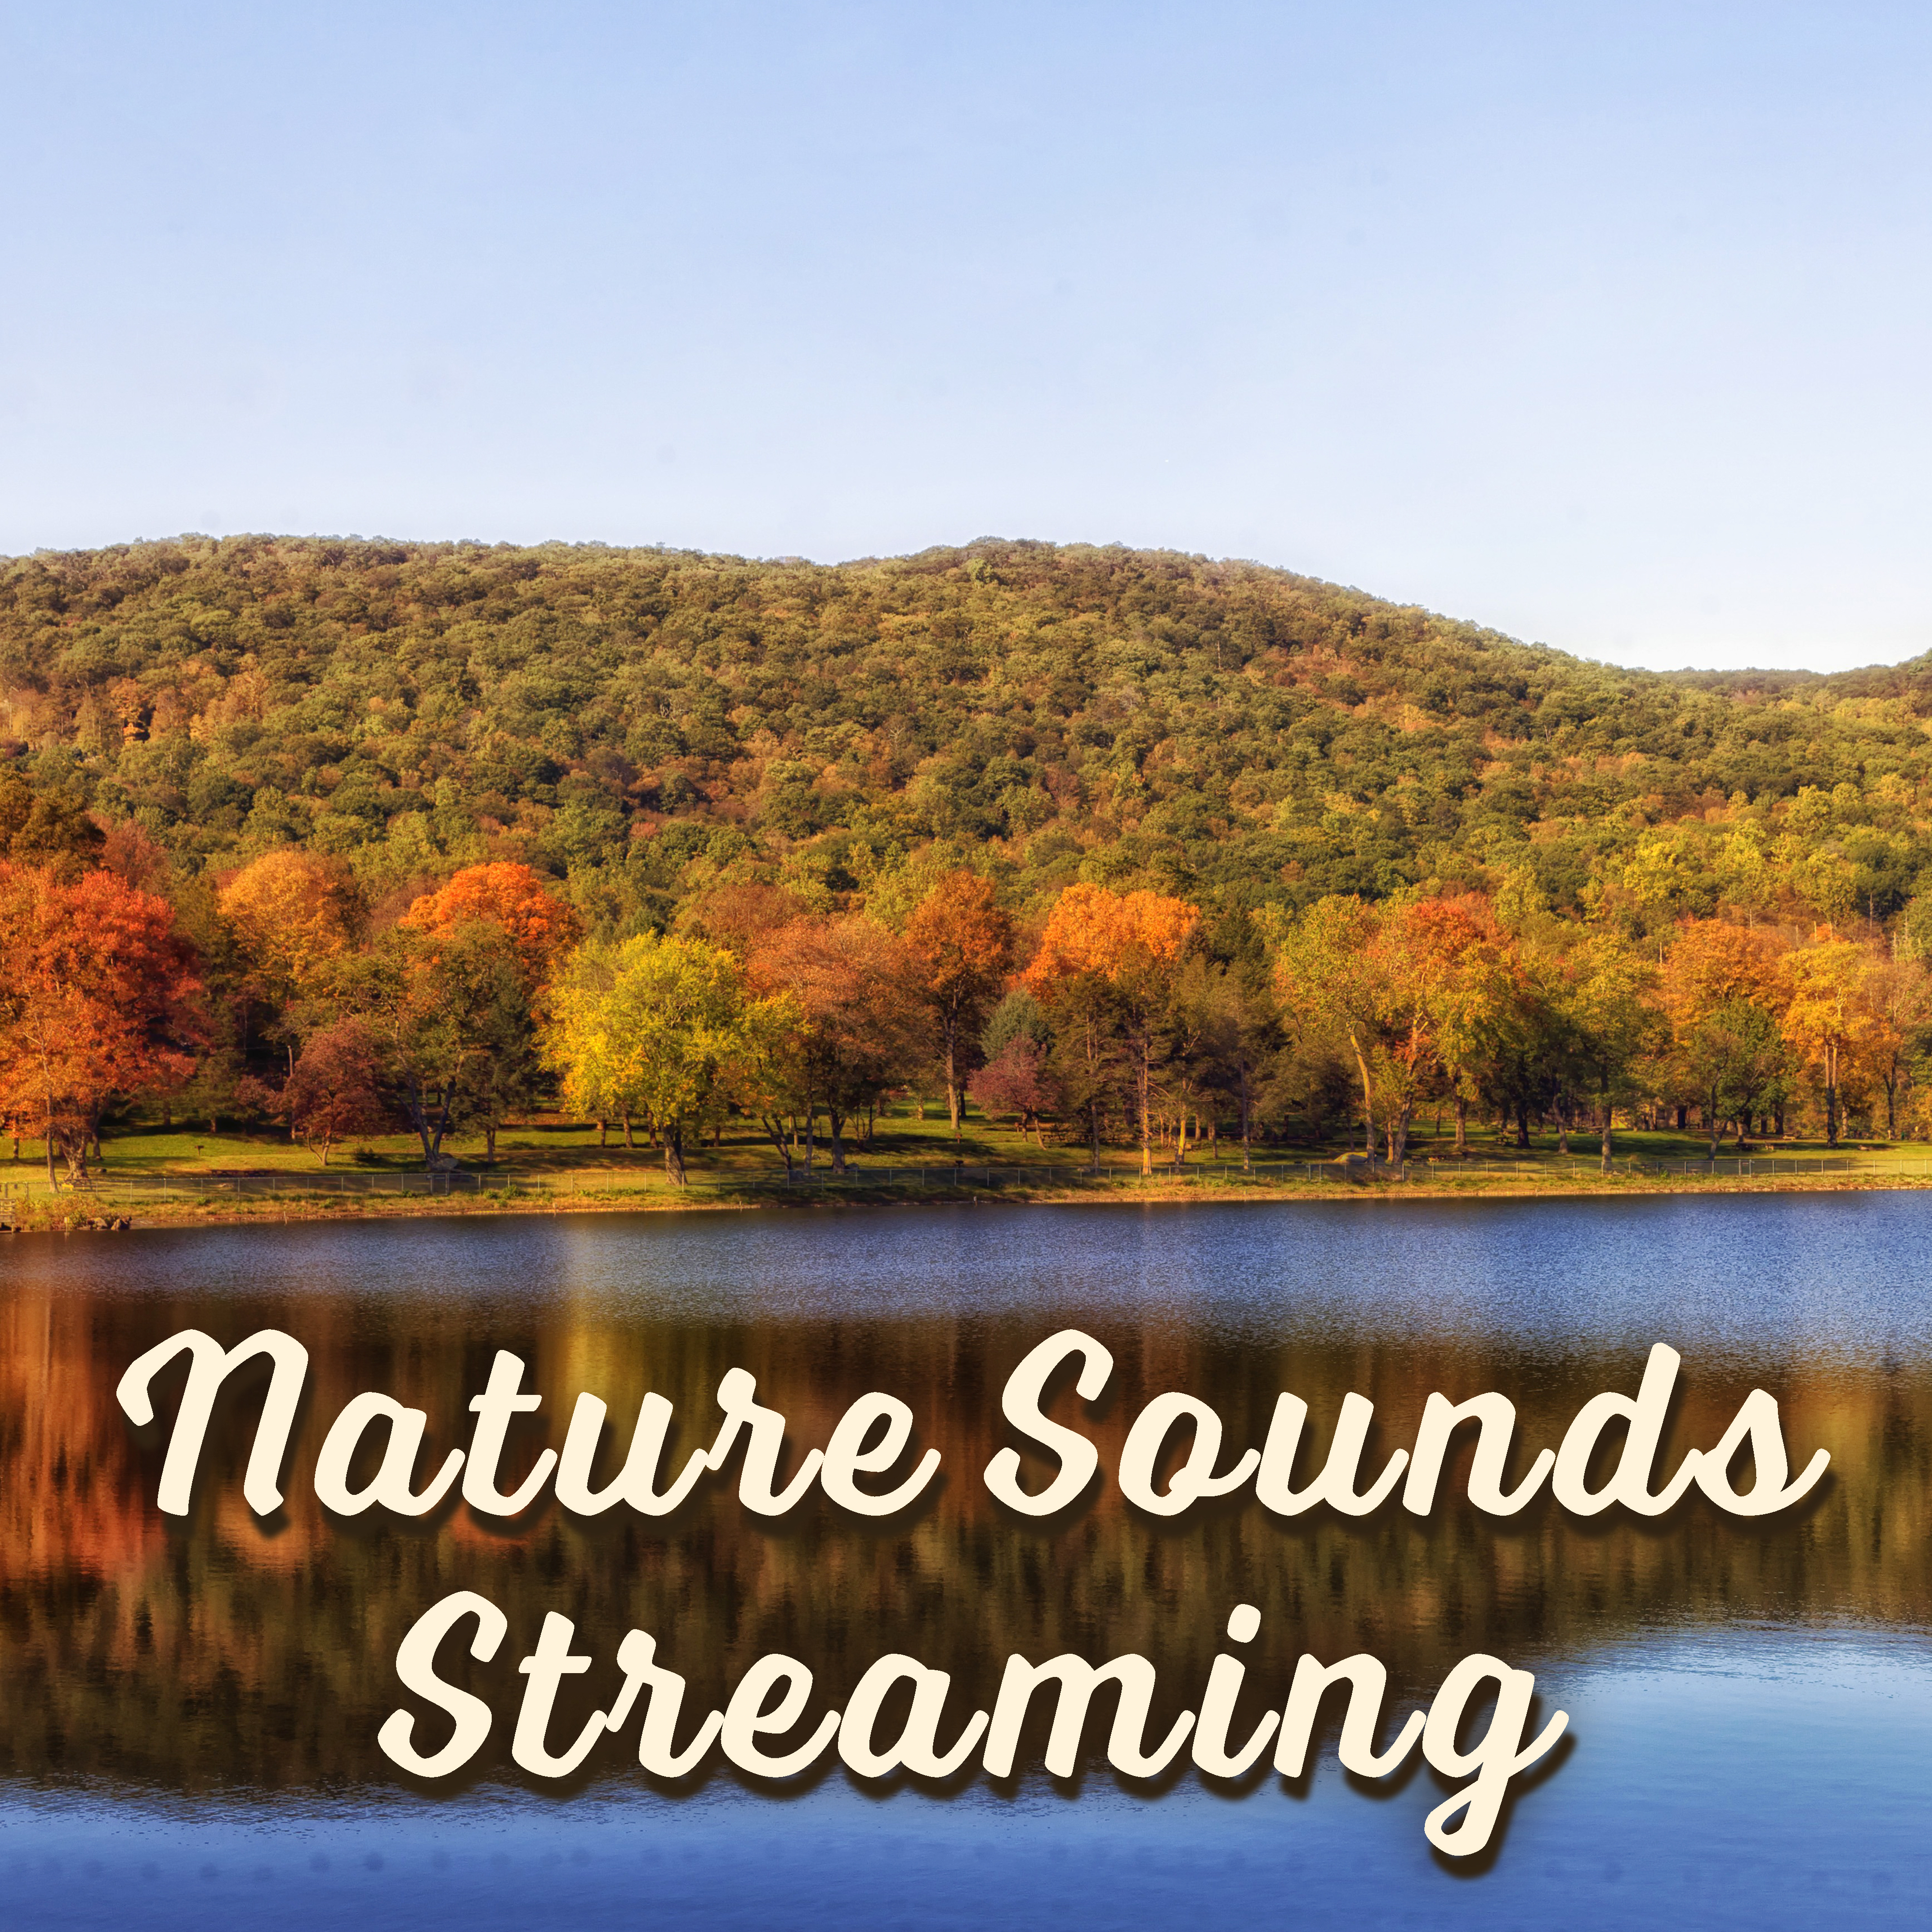 Nature Sounds Streaming  The Best of Relaxing Music, Fresh New Age 2017, Relief Stress, Music Therapy